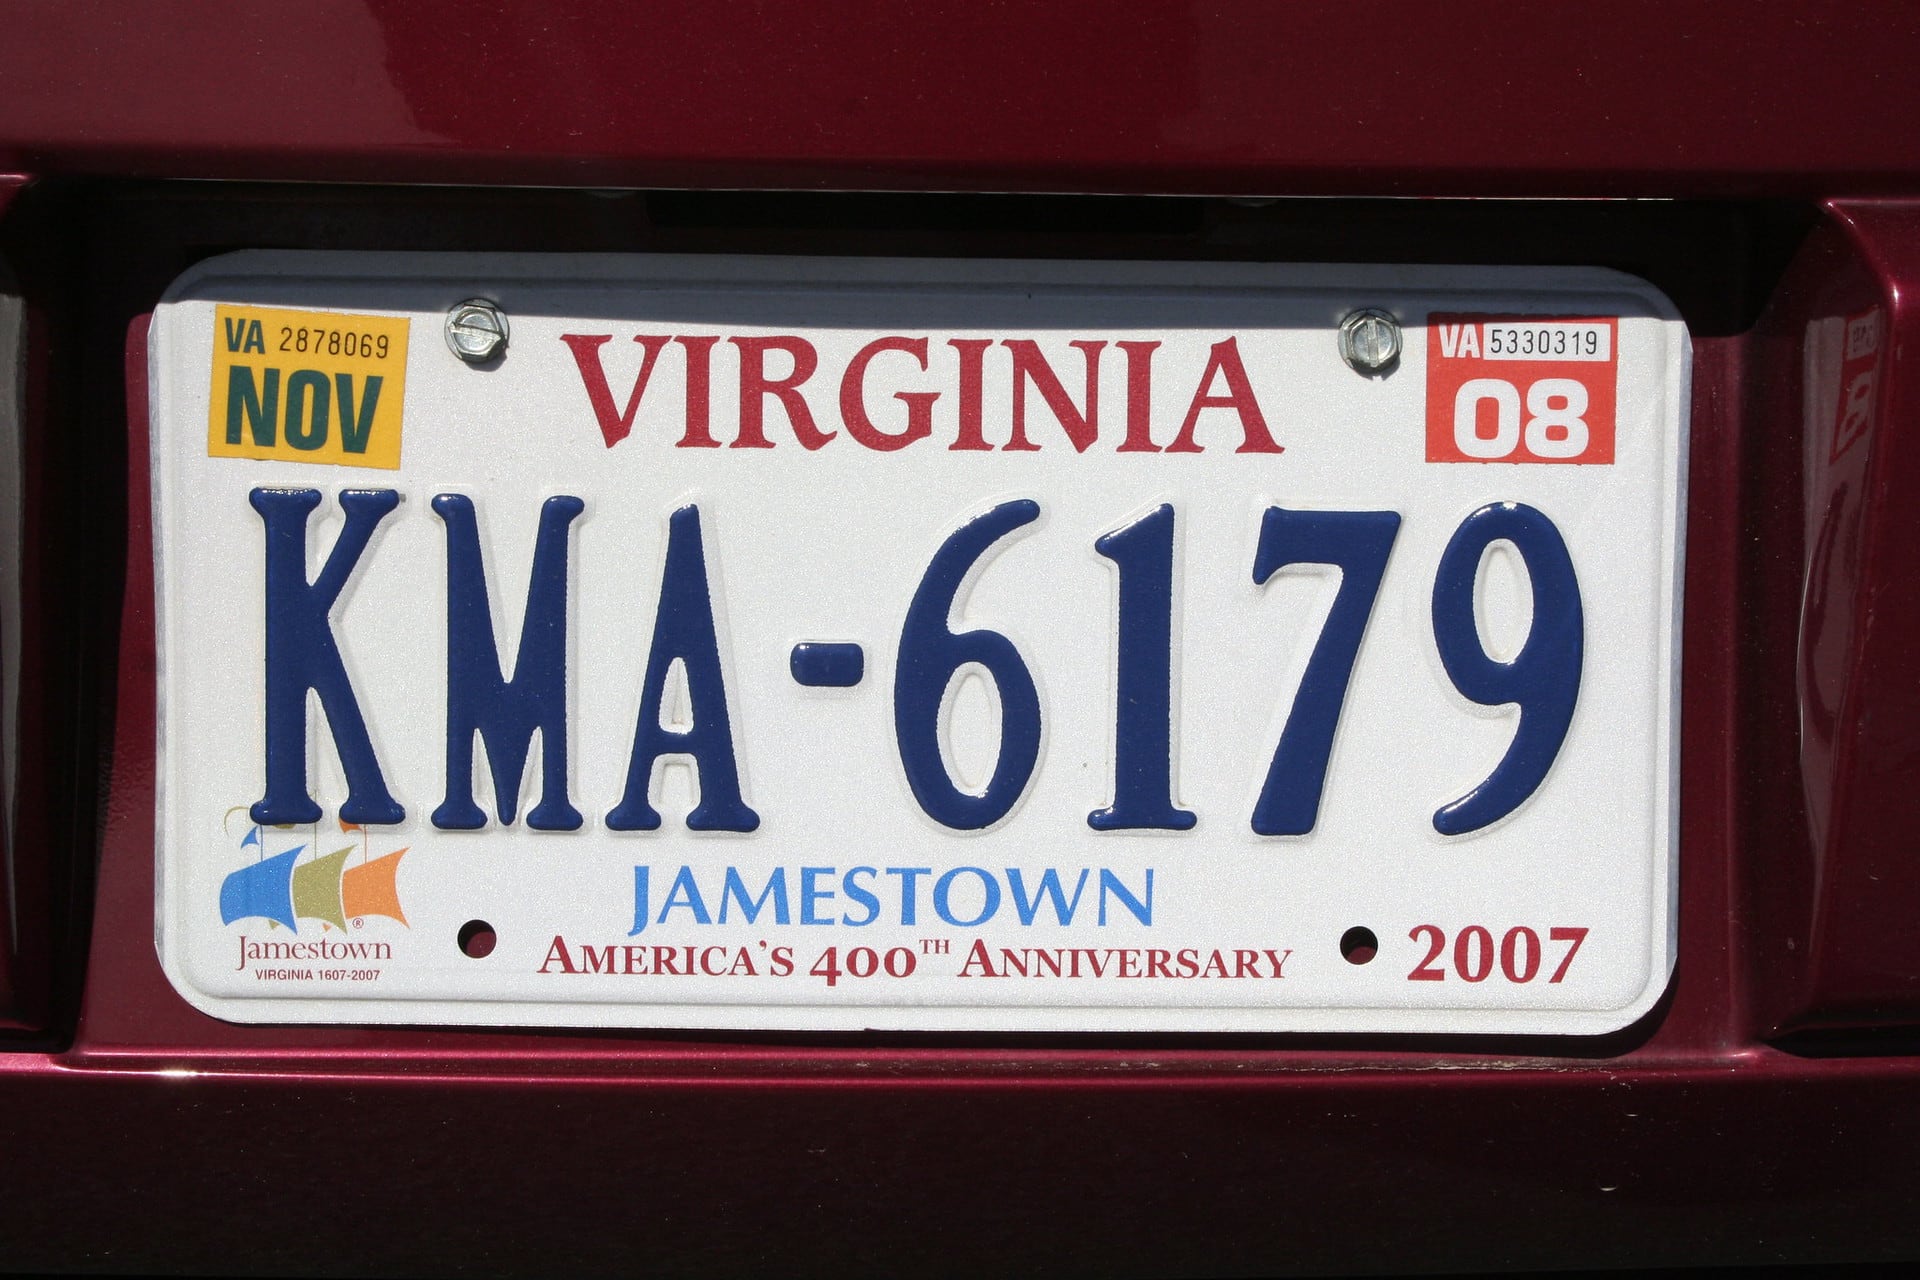 How to Apply and Remove a Vehicle Registration Sticker